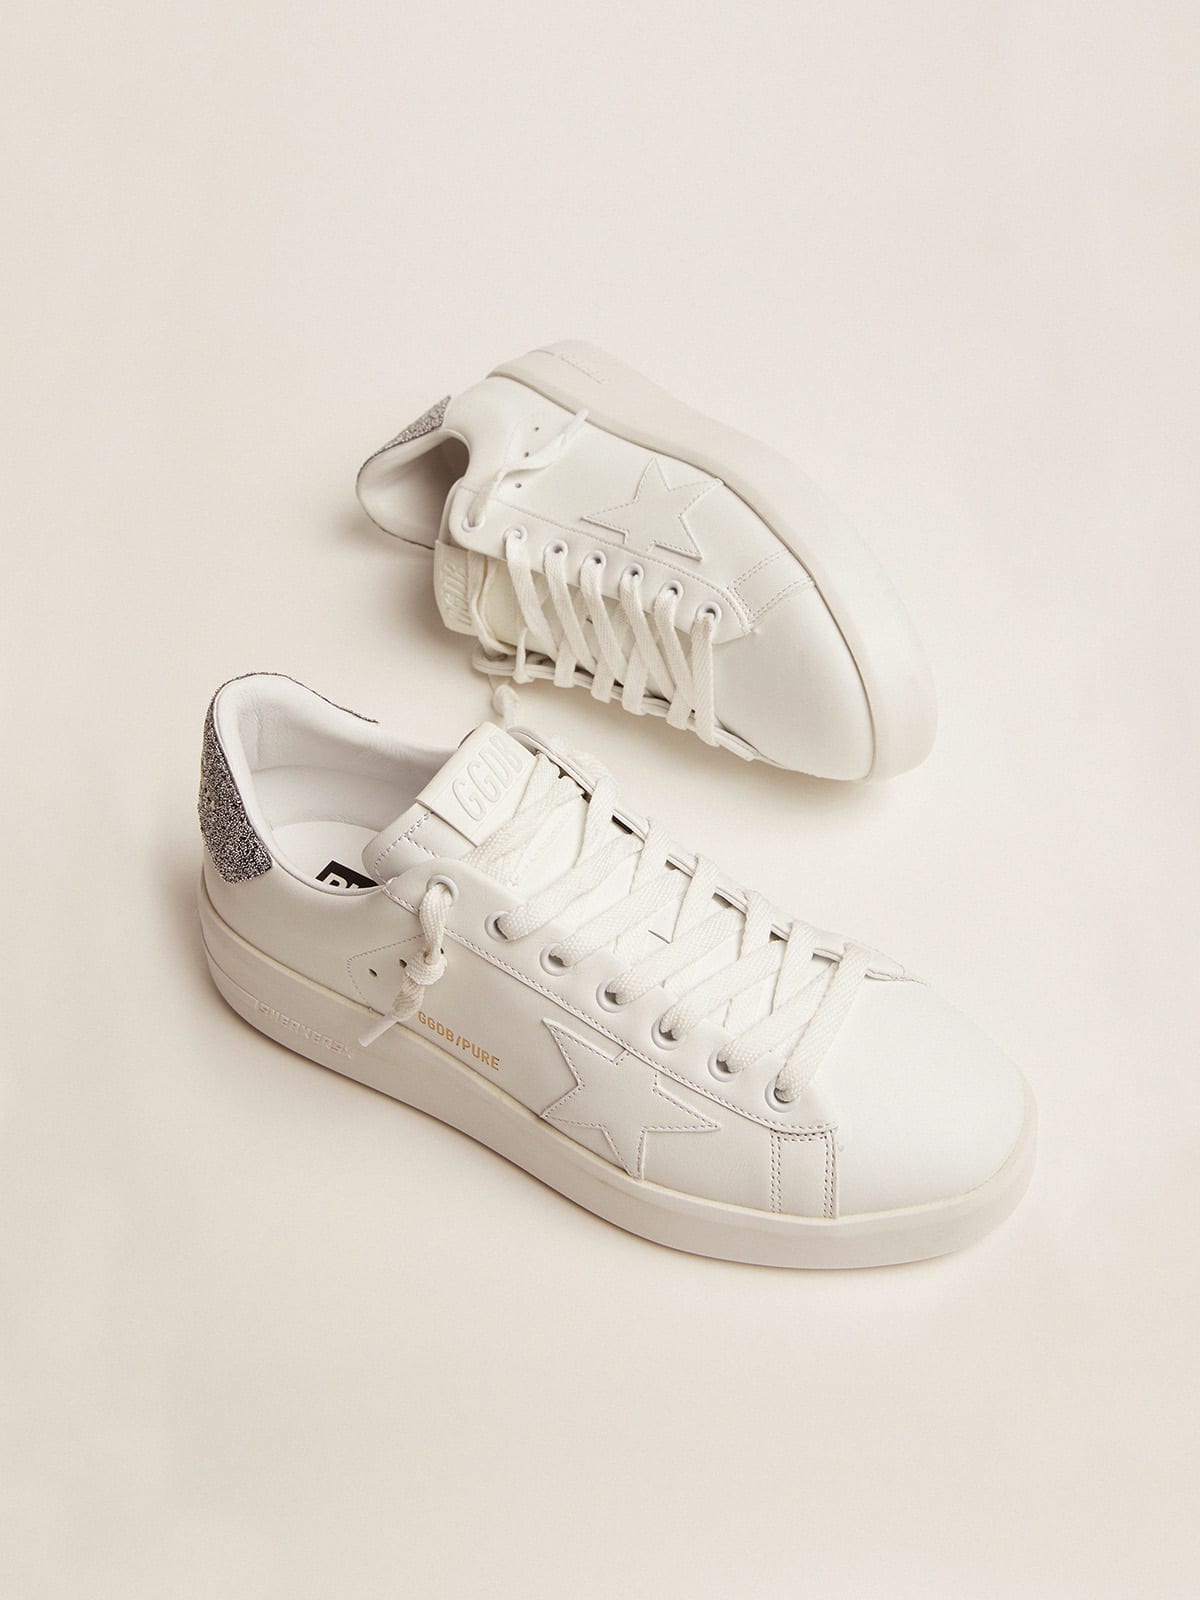 Golden Goose - Purestar sneakers in white leather with silver crystal heel tab in 